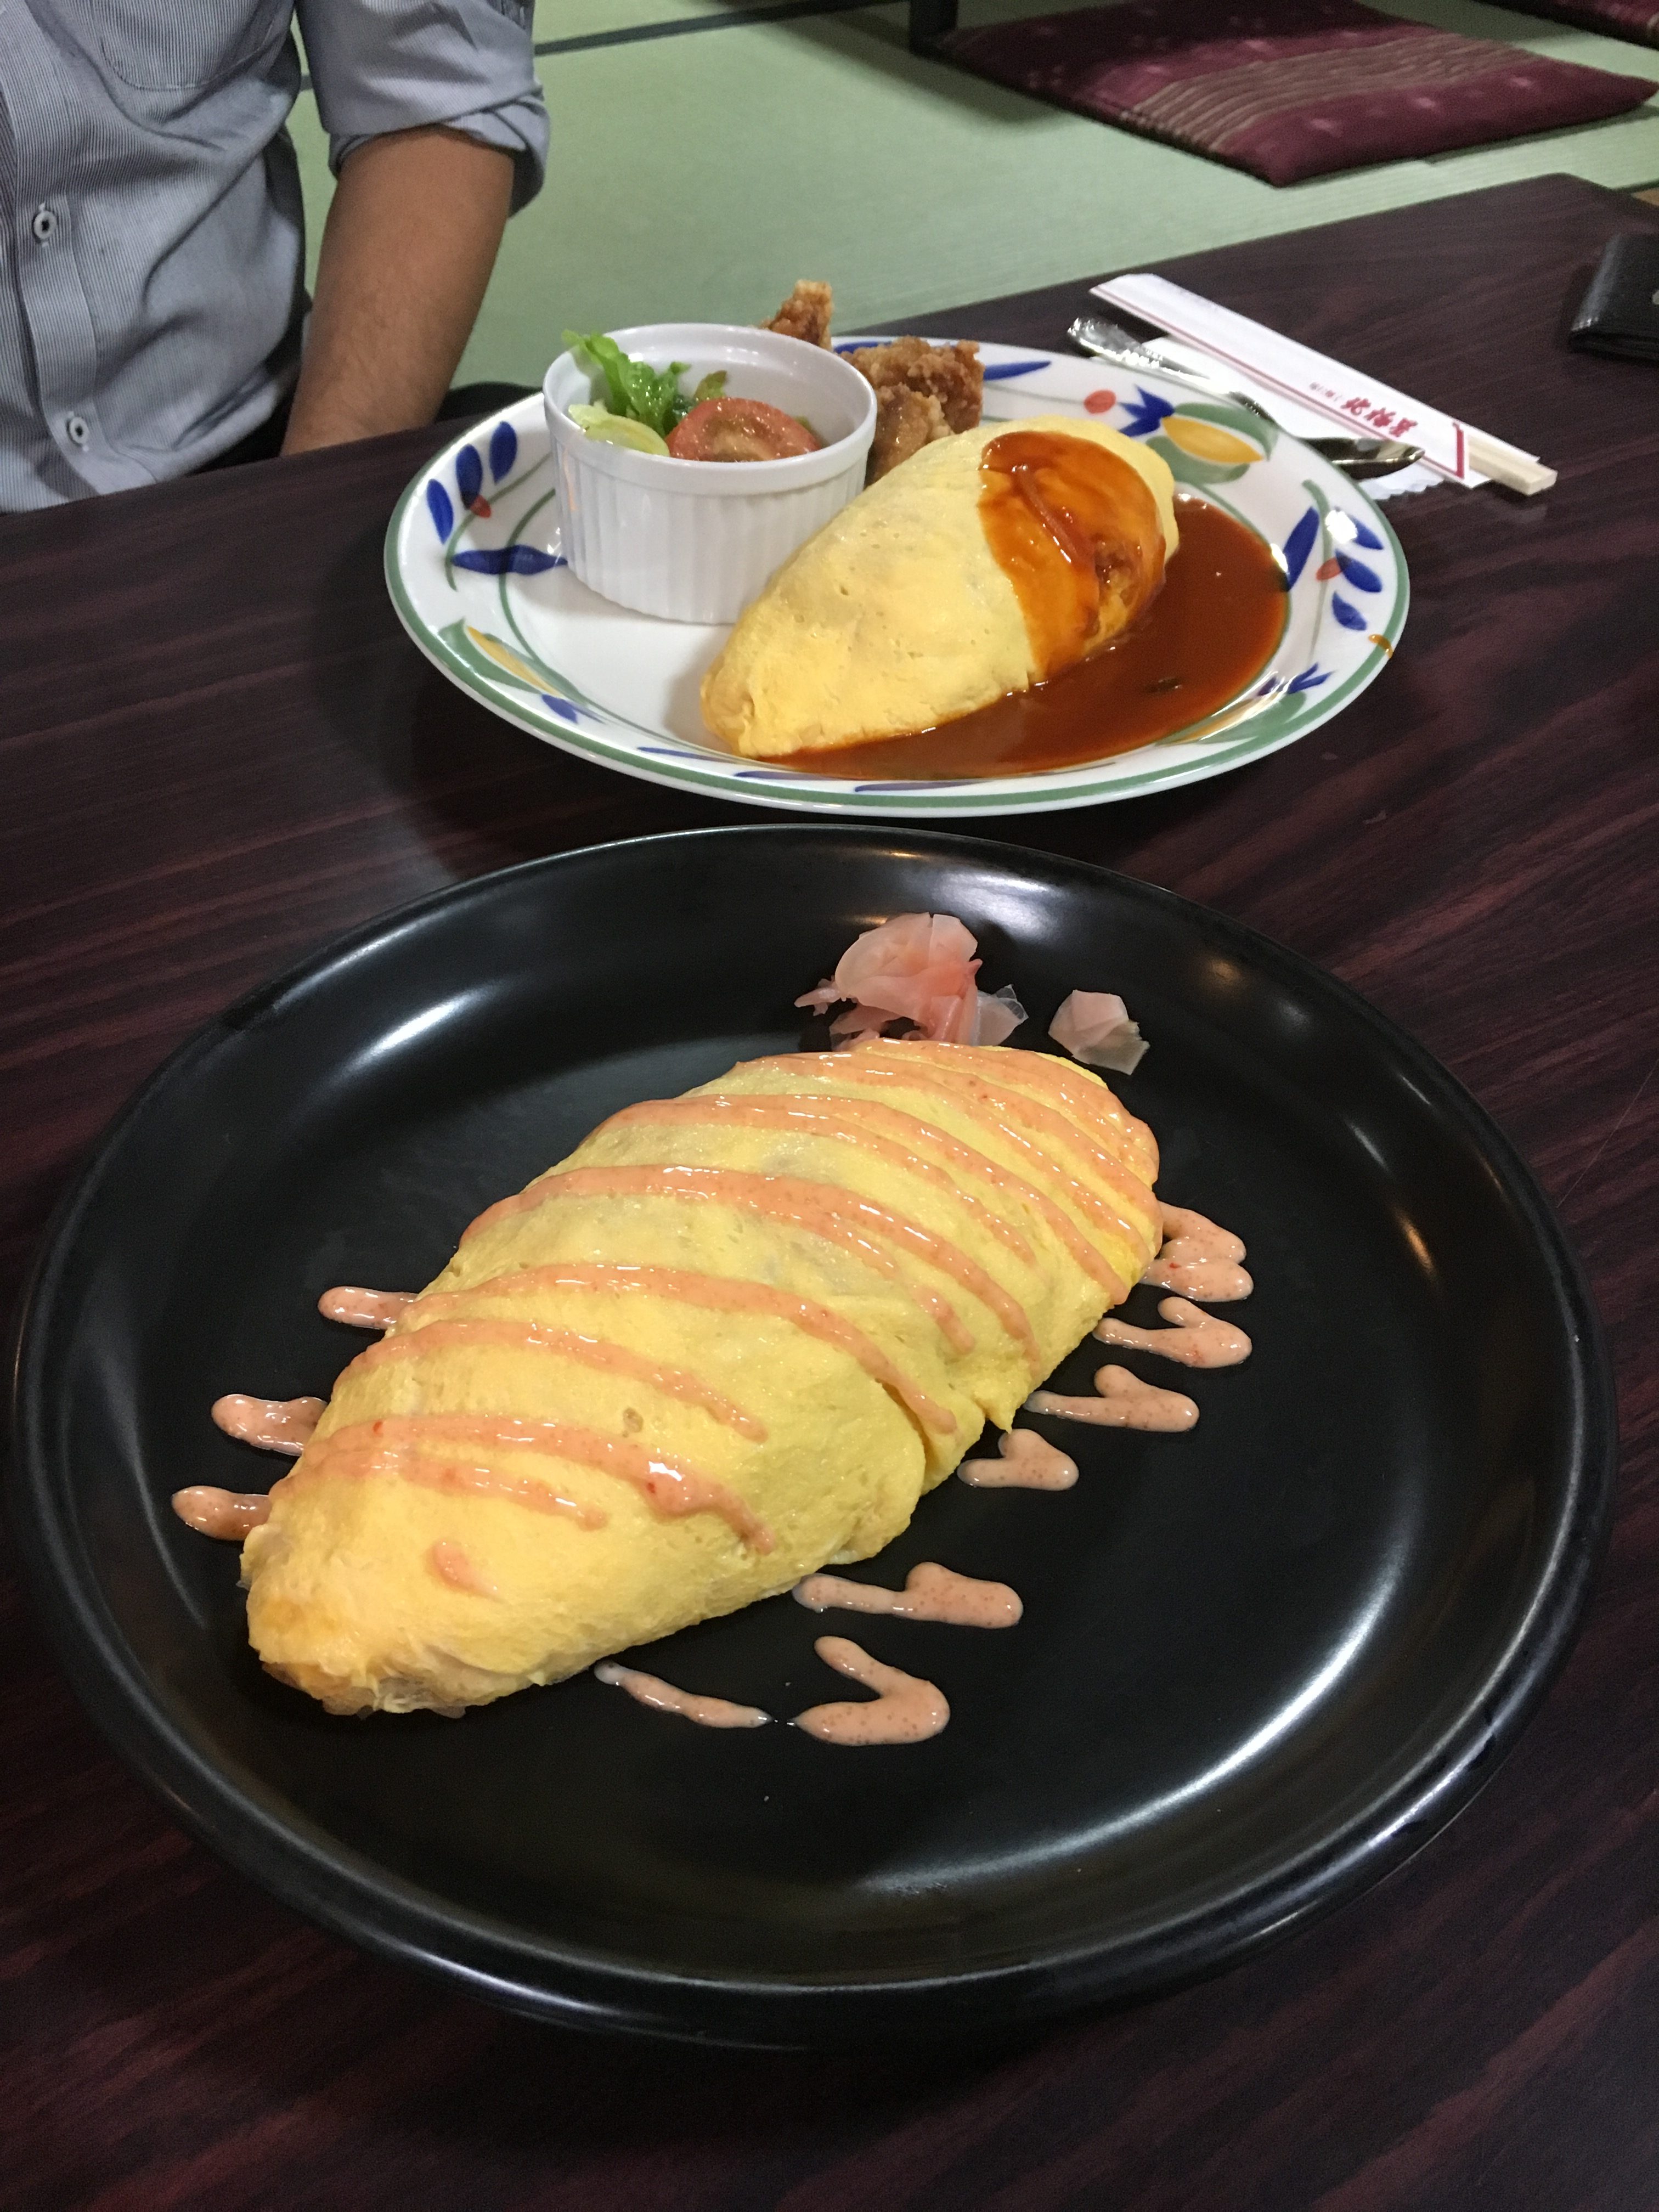 seafood omurice and regular omurice lunch sets with salad side dish